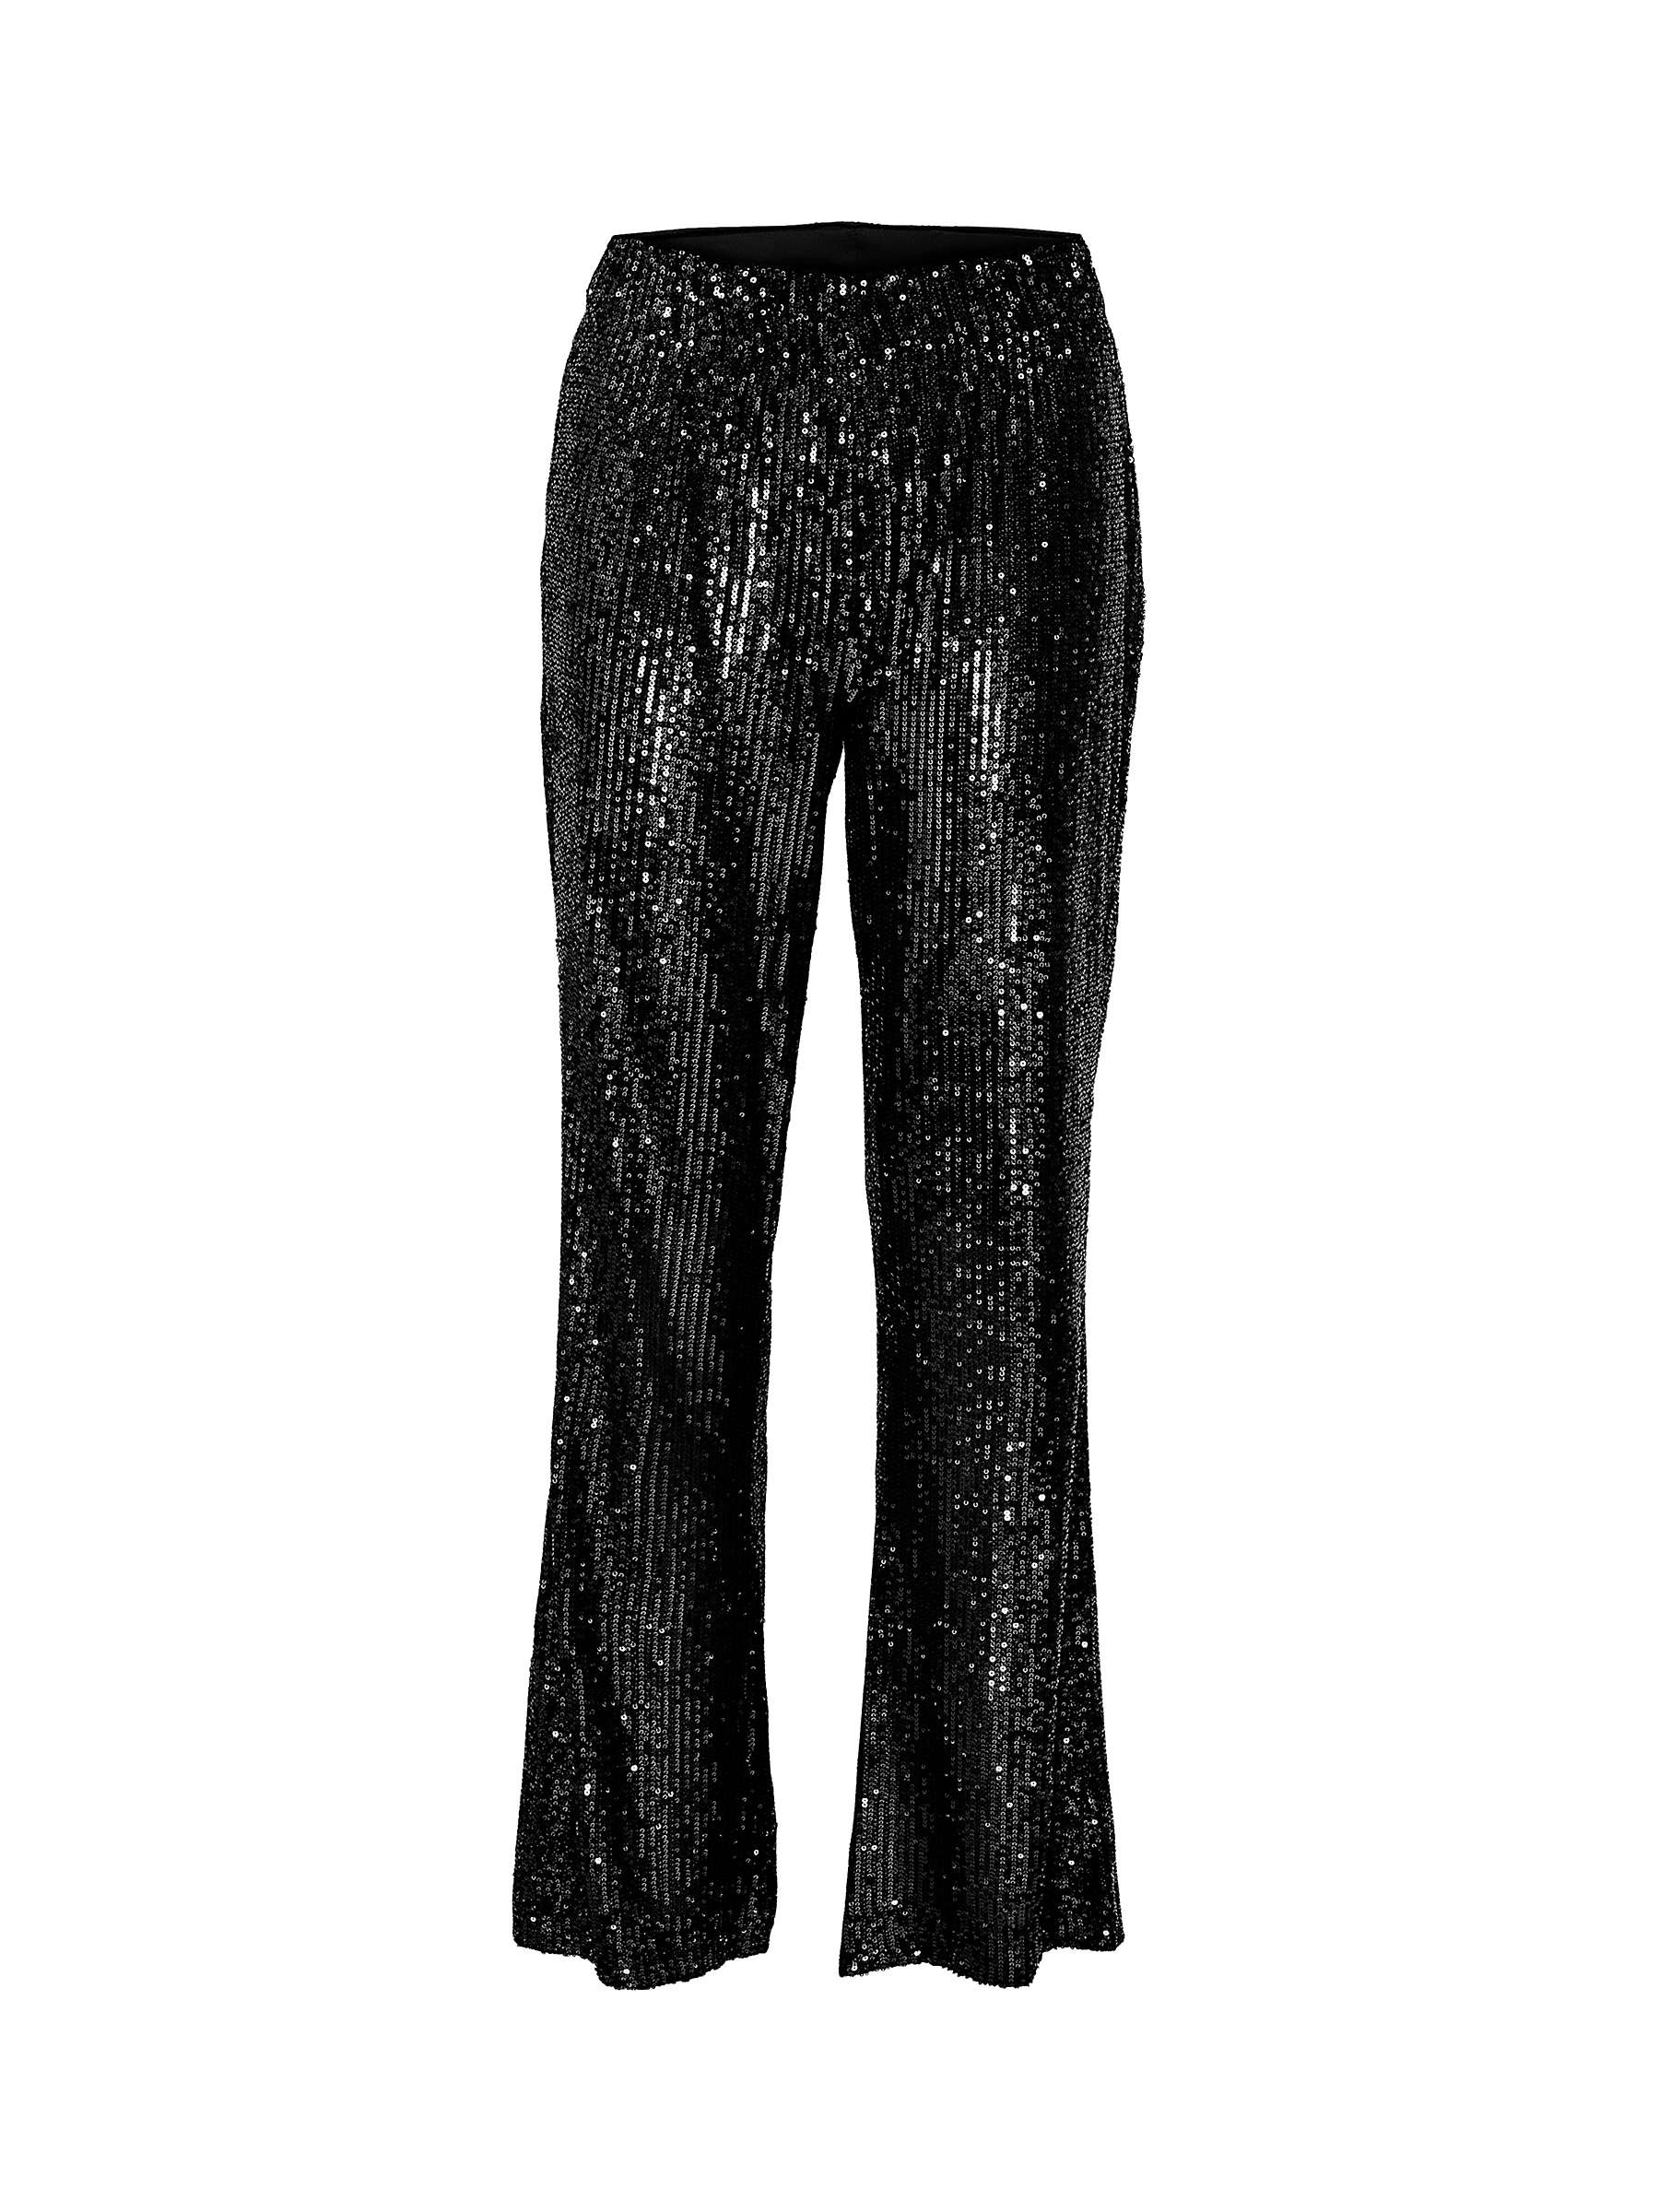 Buy Soaked In Luxury Suse Sequin Trousers Online at johnlewis.com